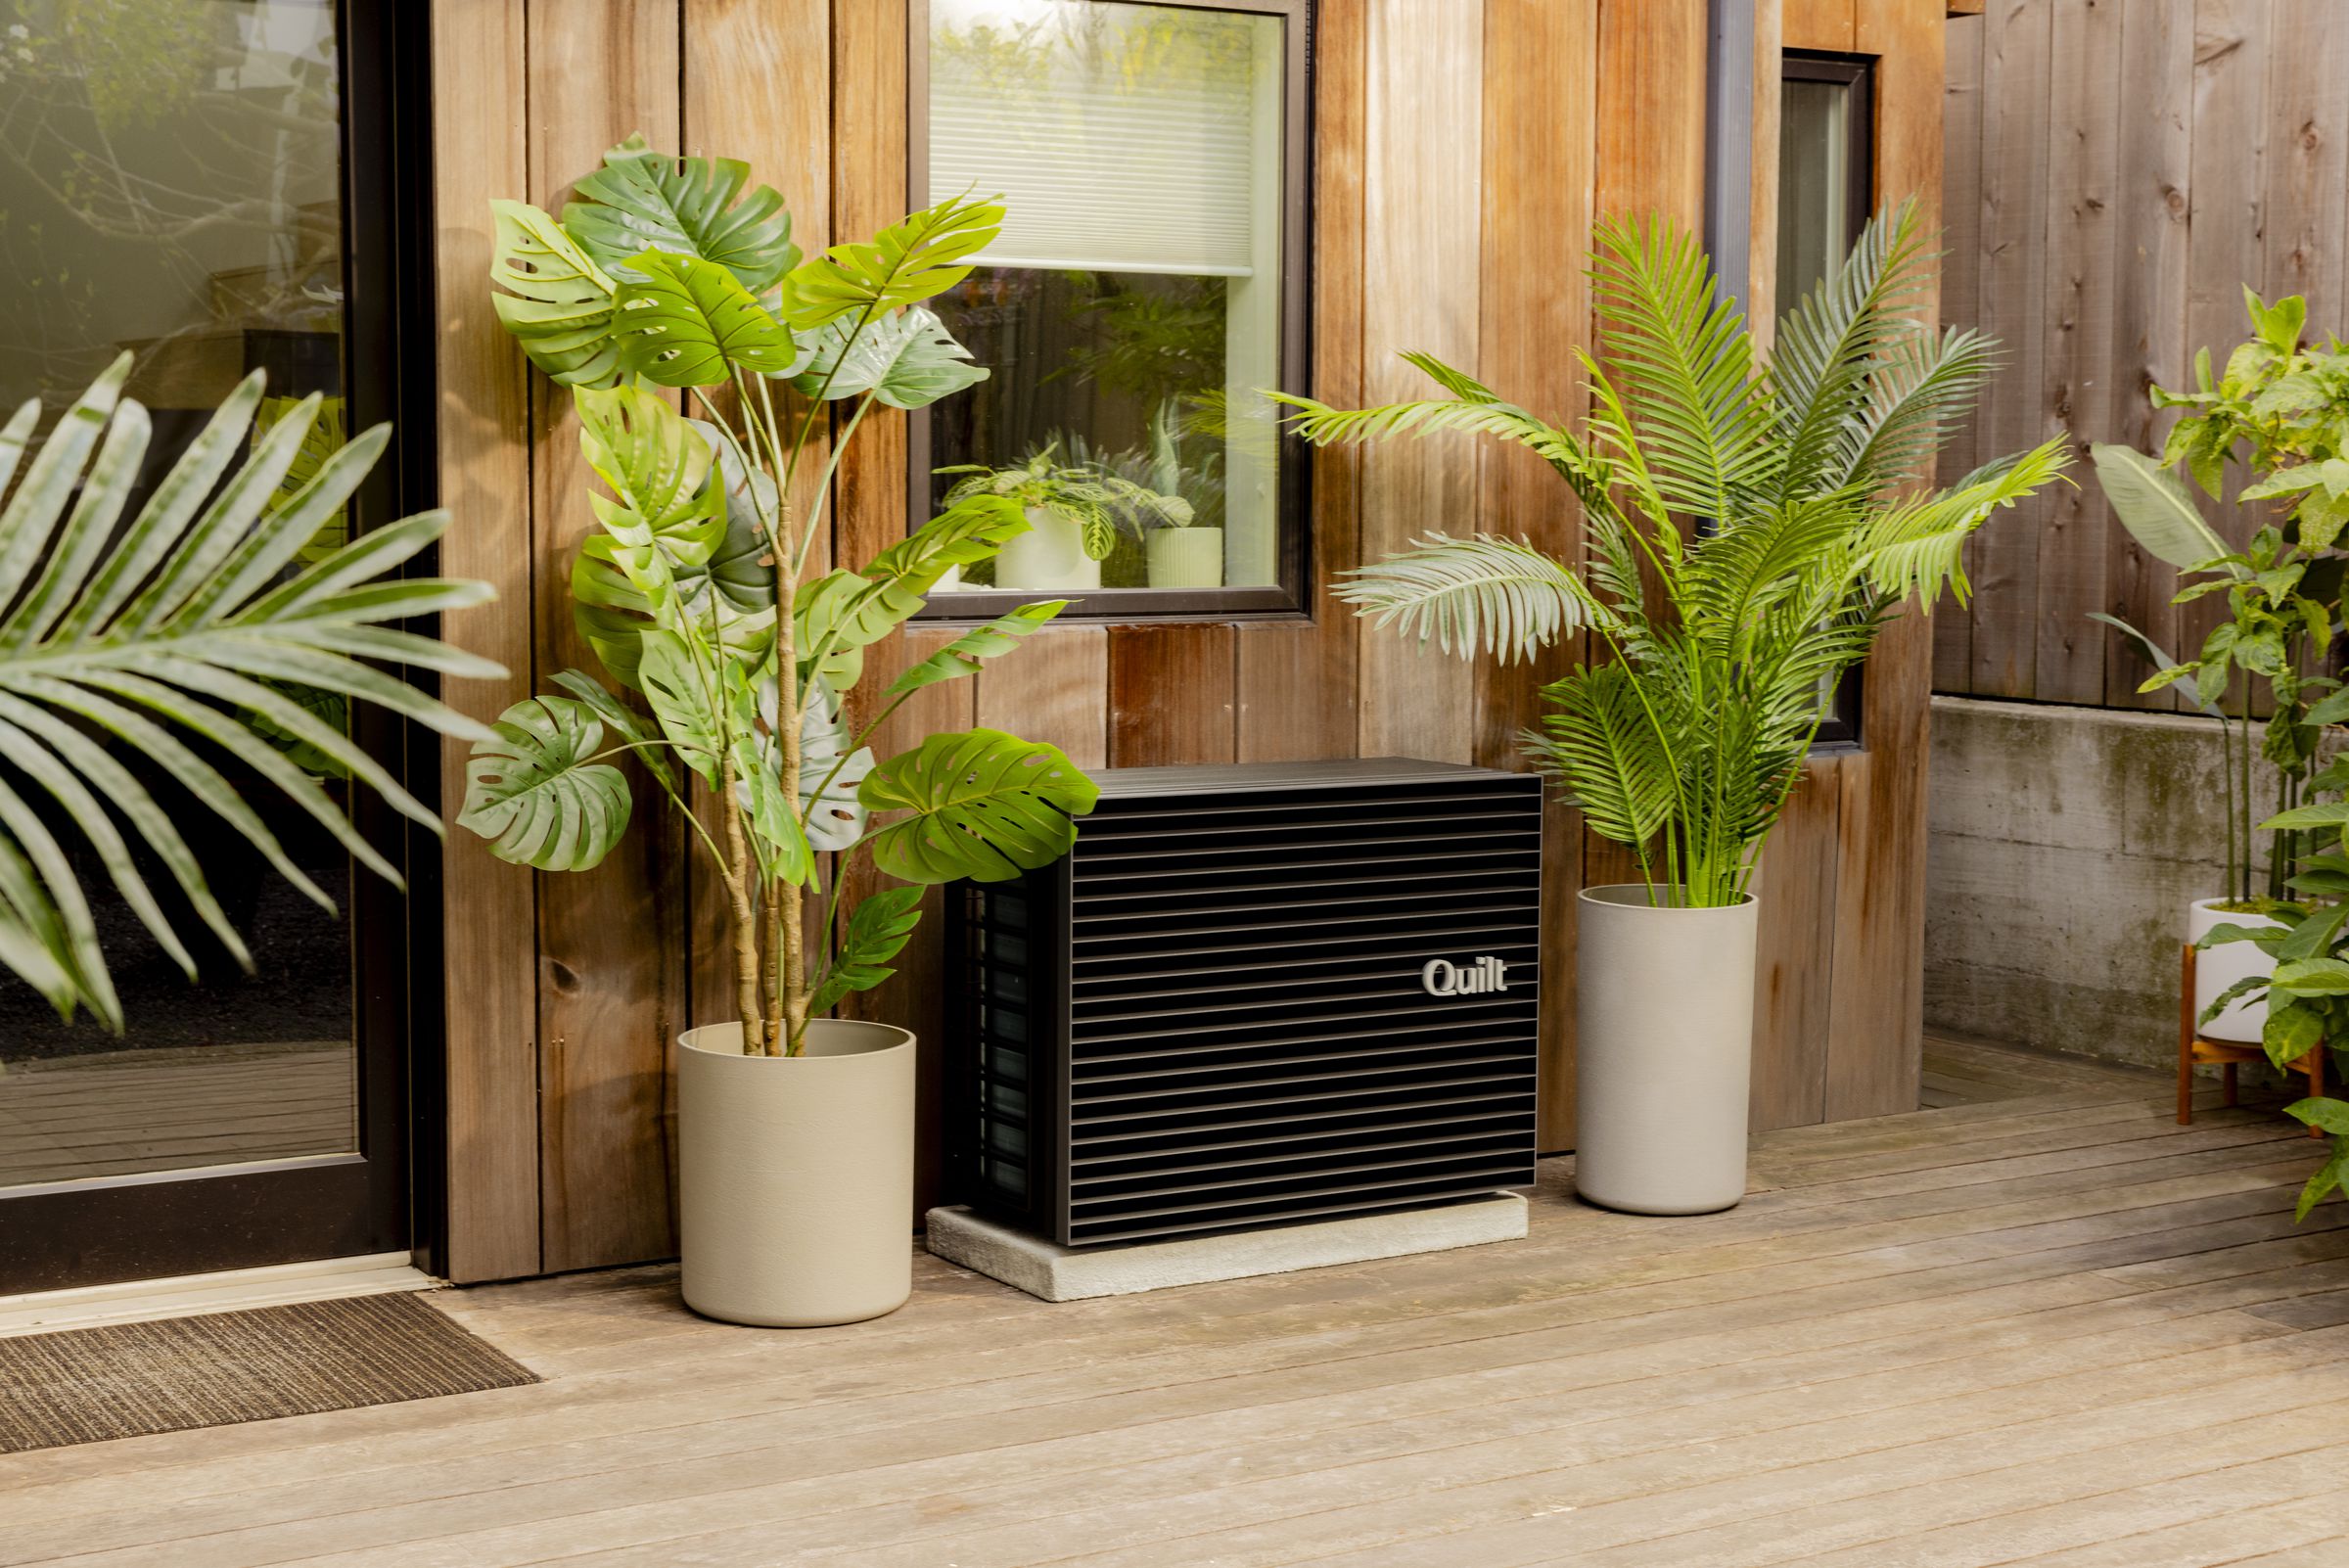 <em>The Quilt outdoor units are designed to be more attractive than most compressors.</em>